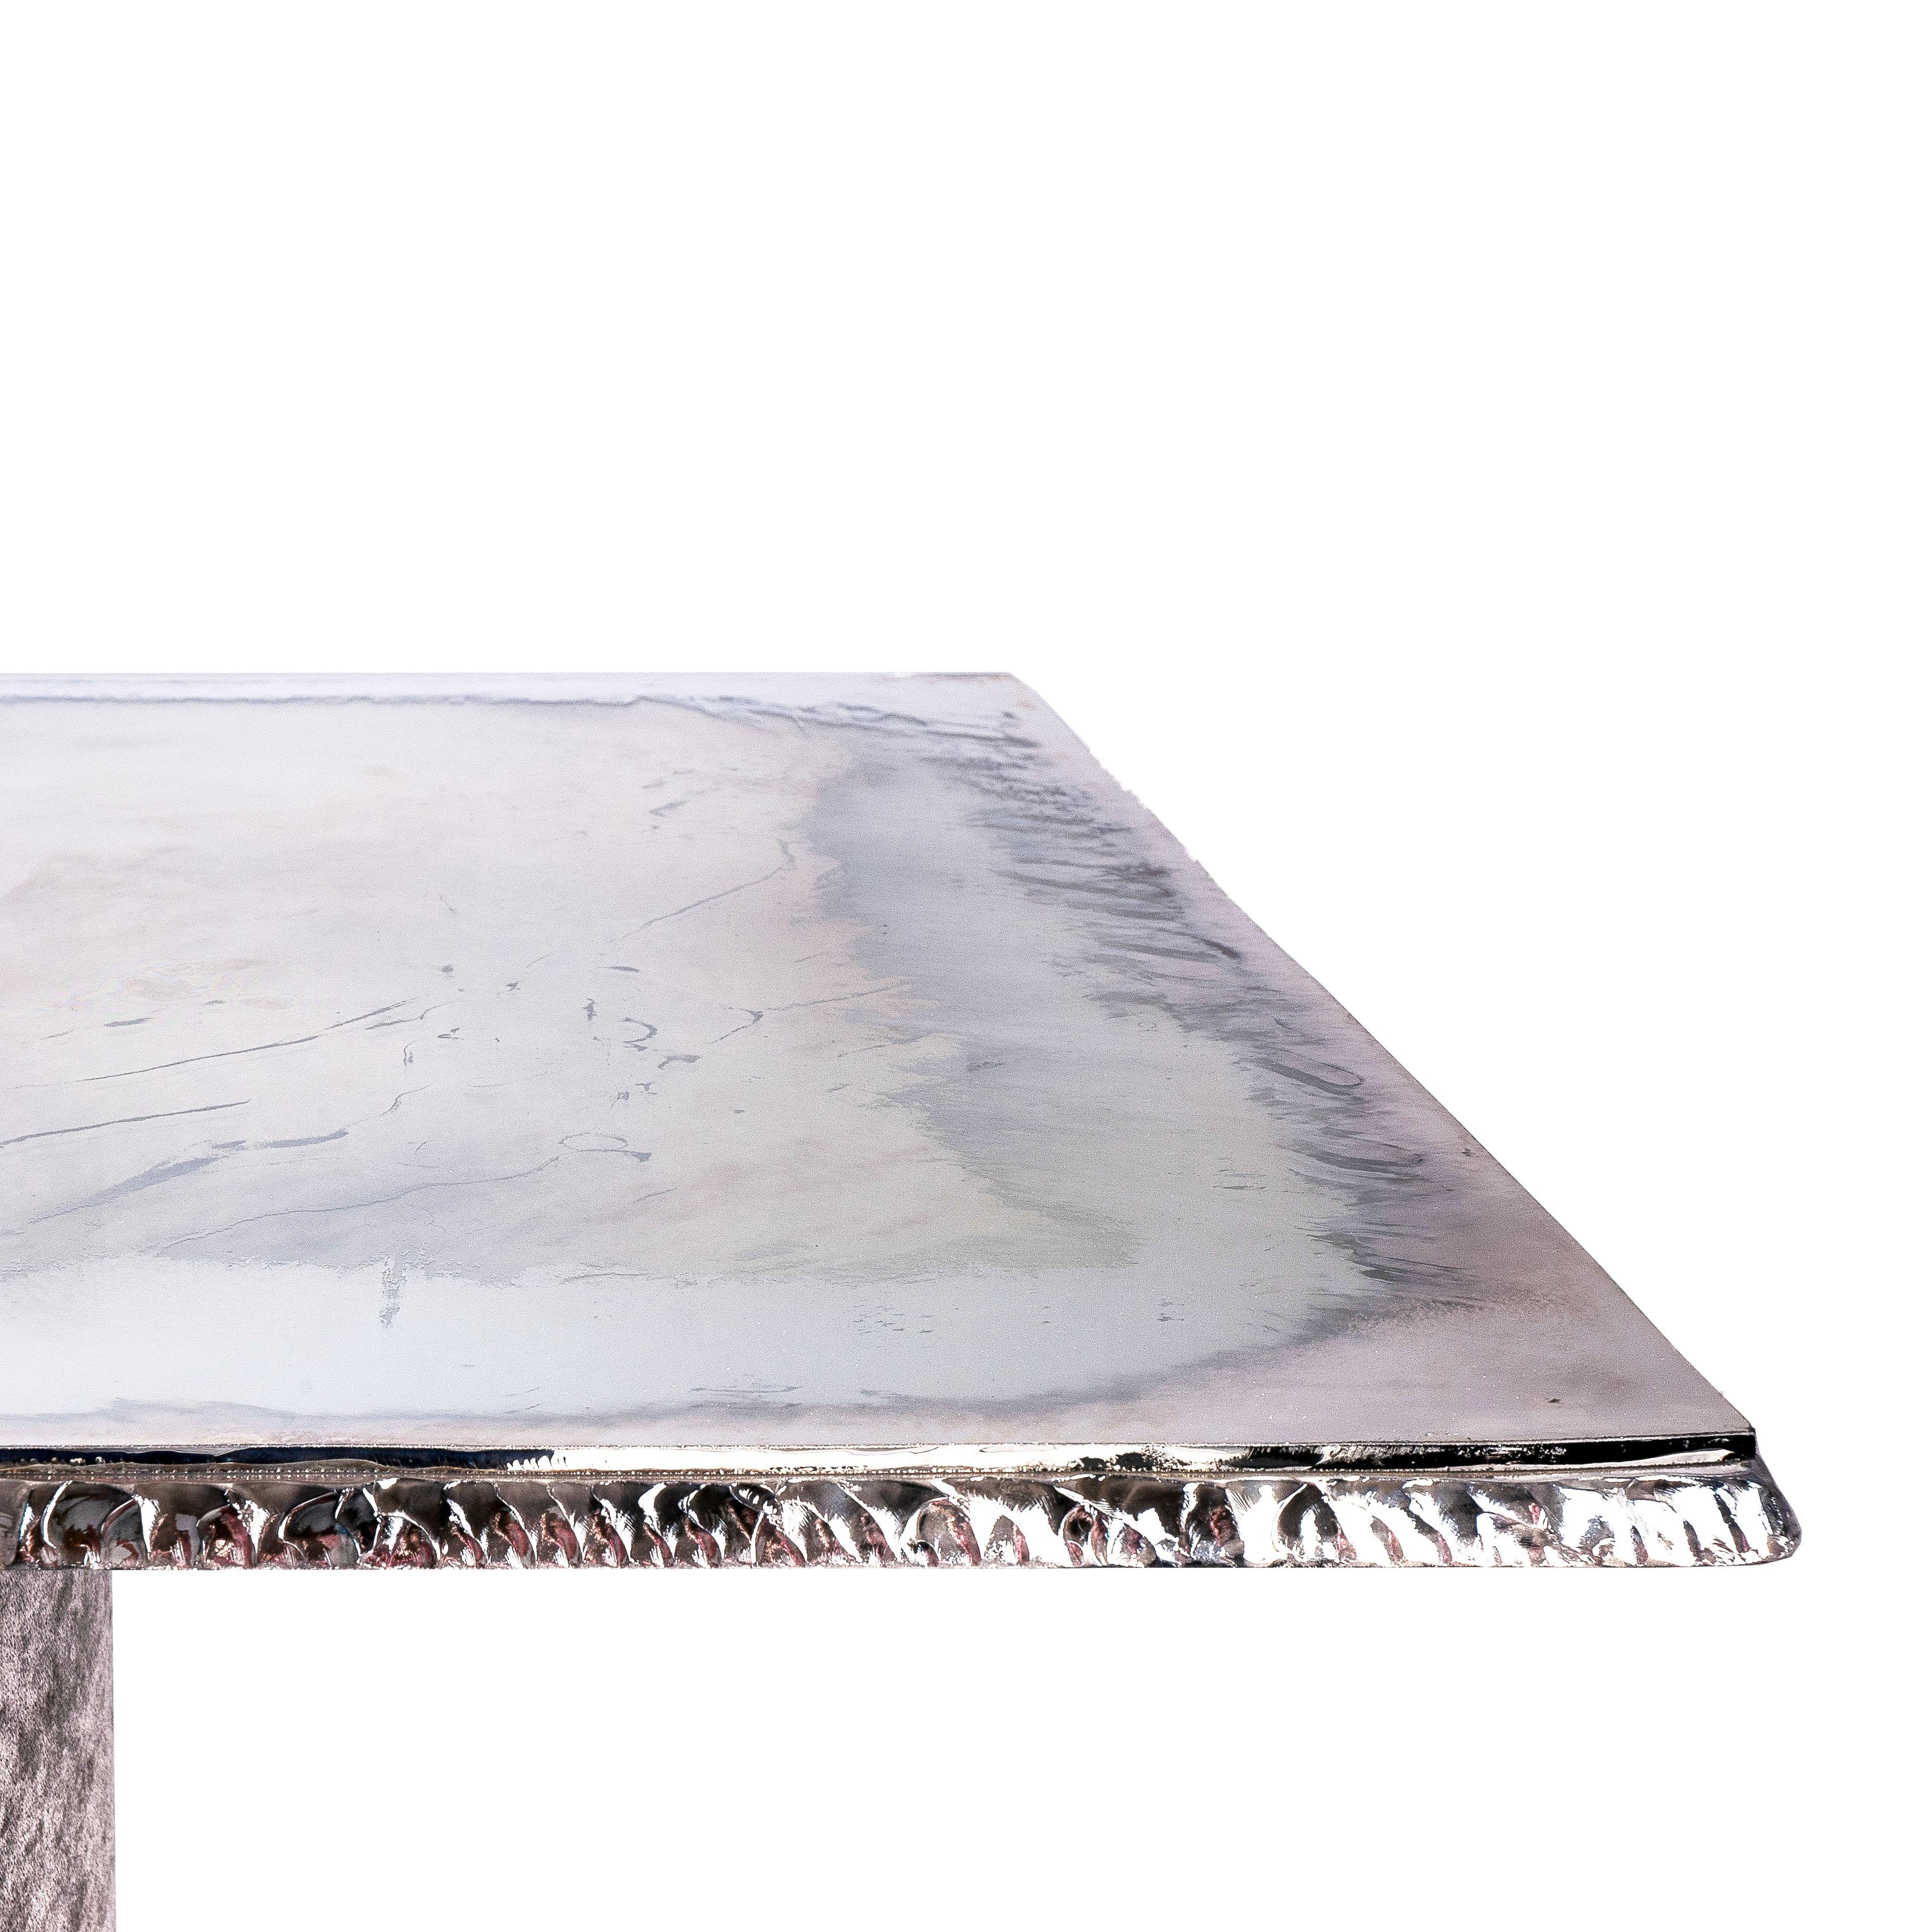 Gem, Contemporary Dining Table 280 Silvered Glass Top, Pair of 